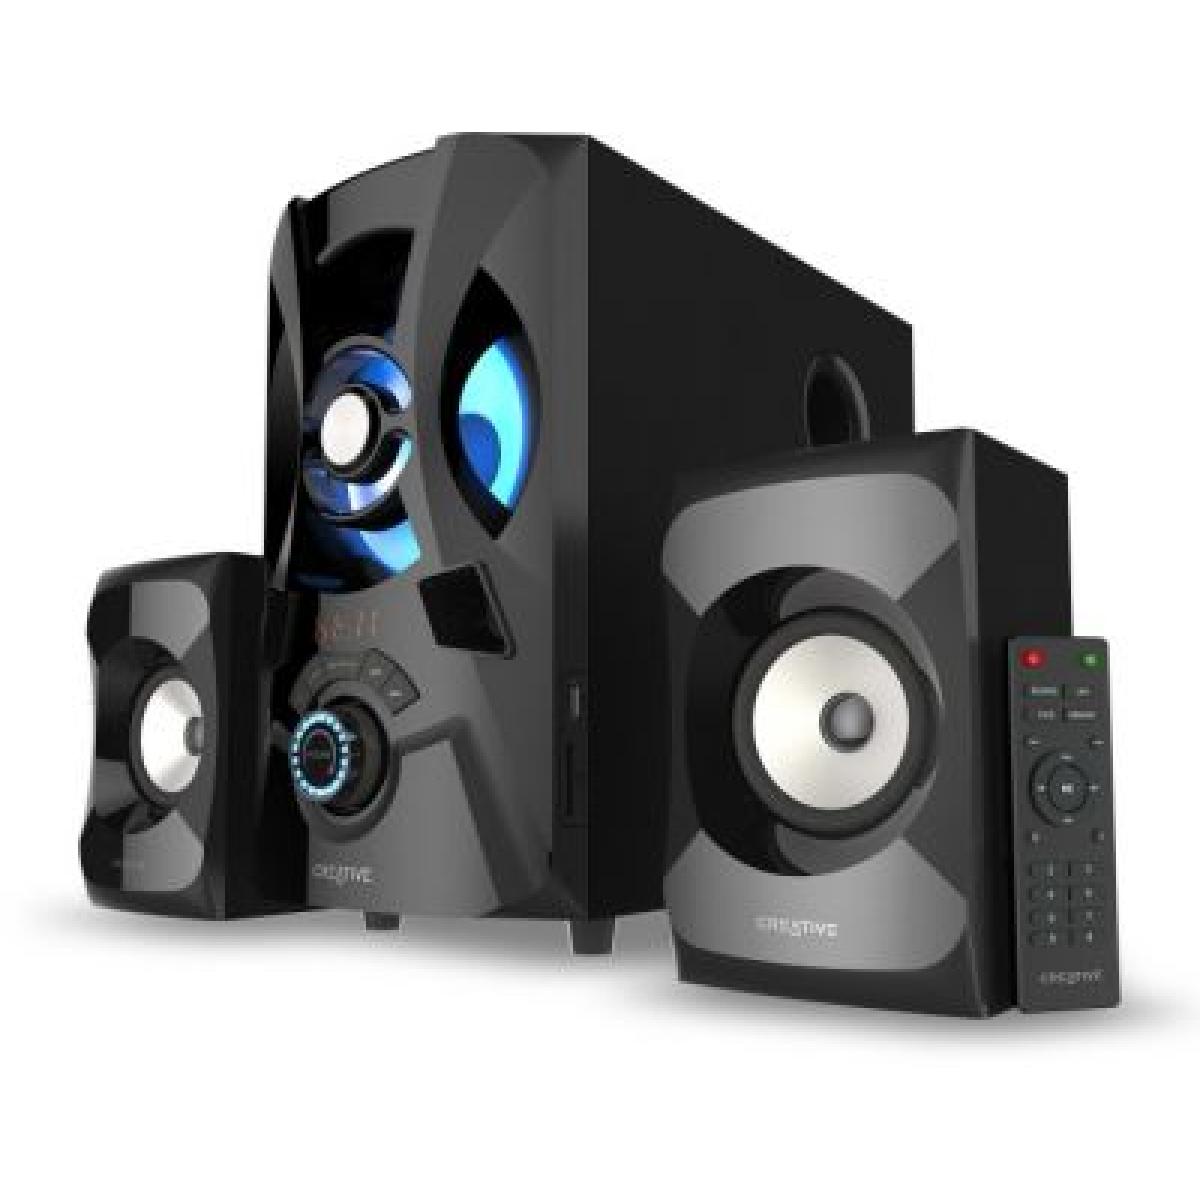 Creative SBS E2900 2.1 Powerful Speaker With Subwoofer